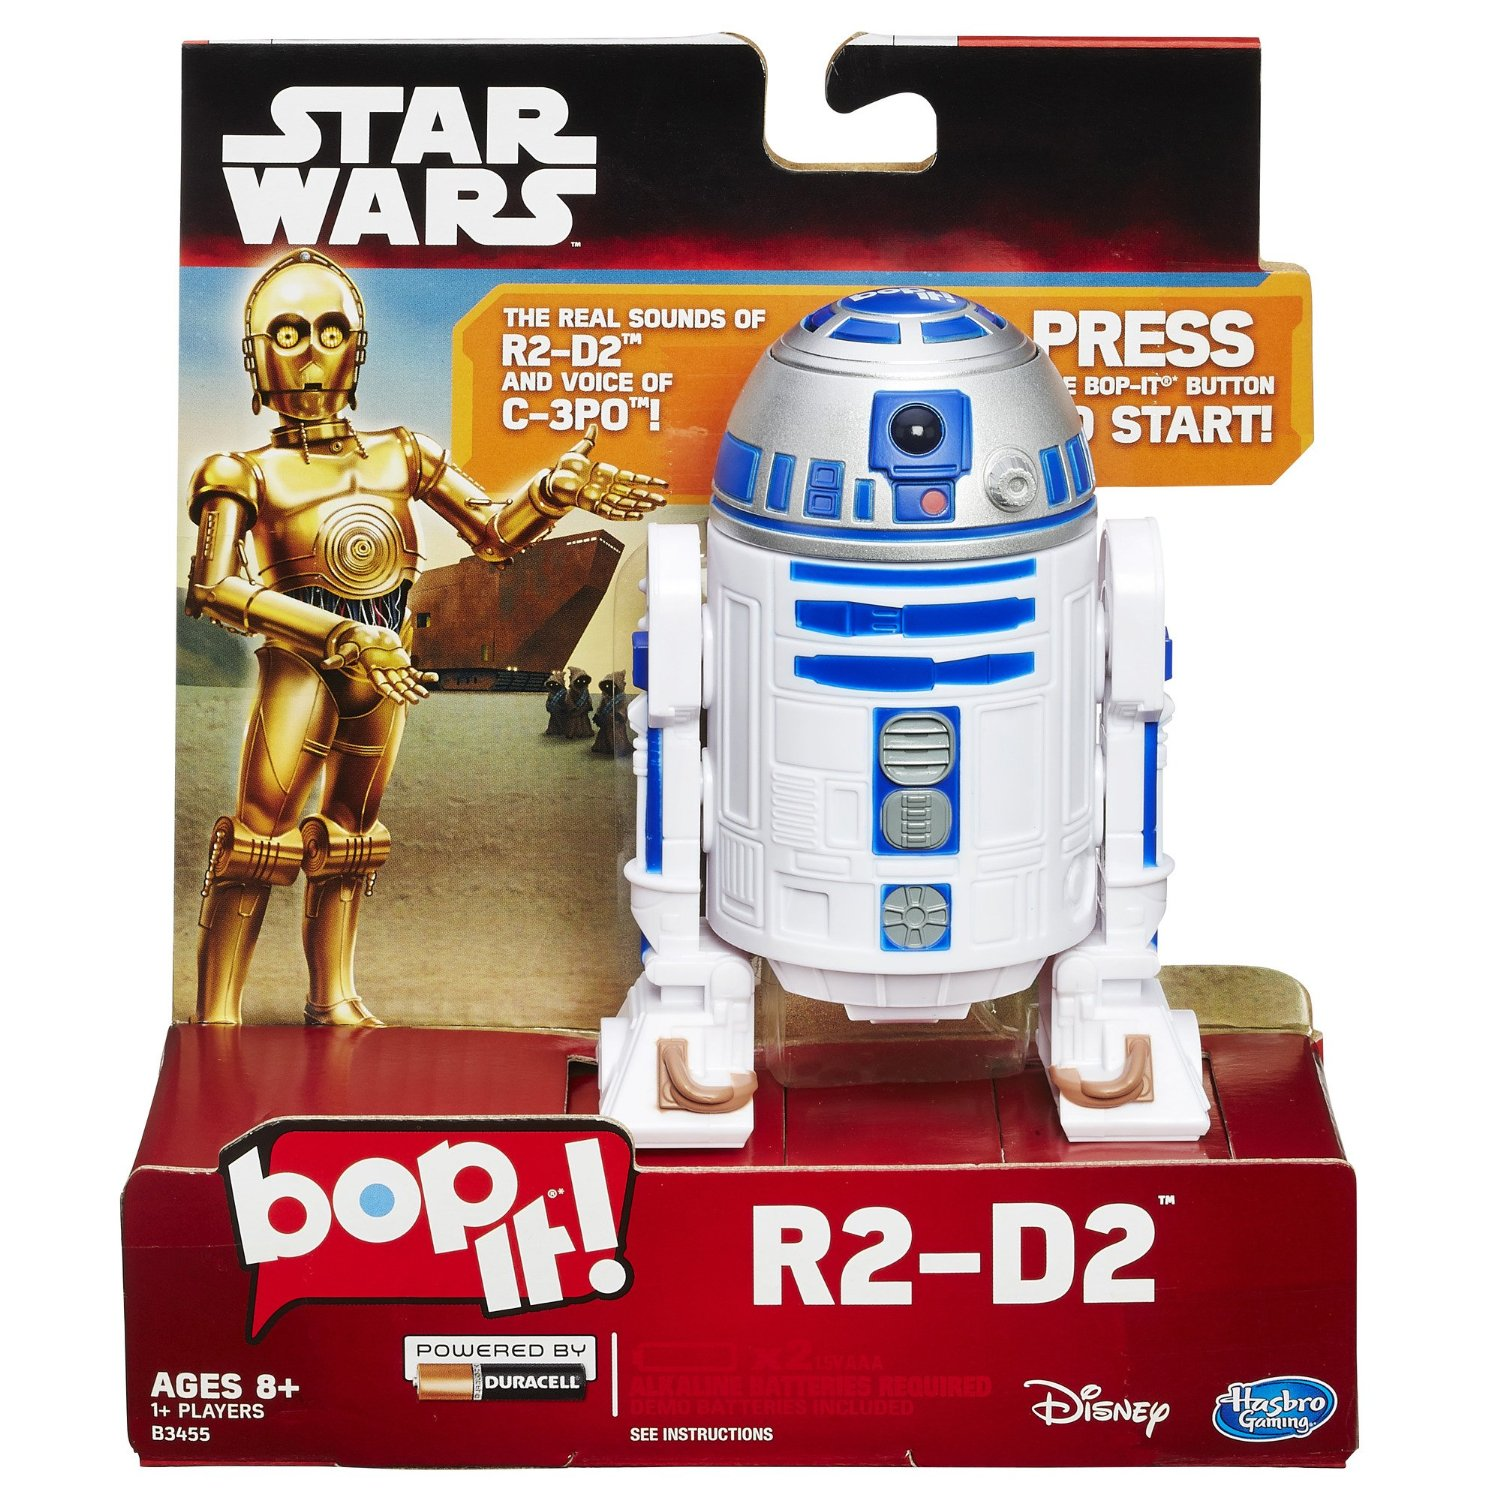 Star Wars Bop It Game Only $12.63 on Amazon!